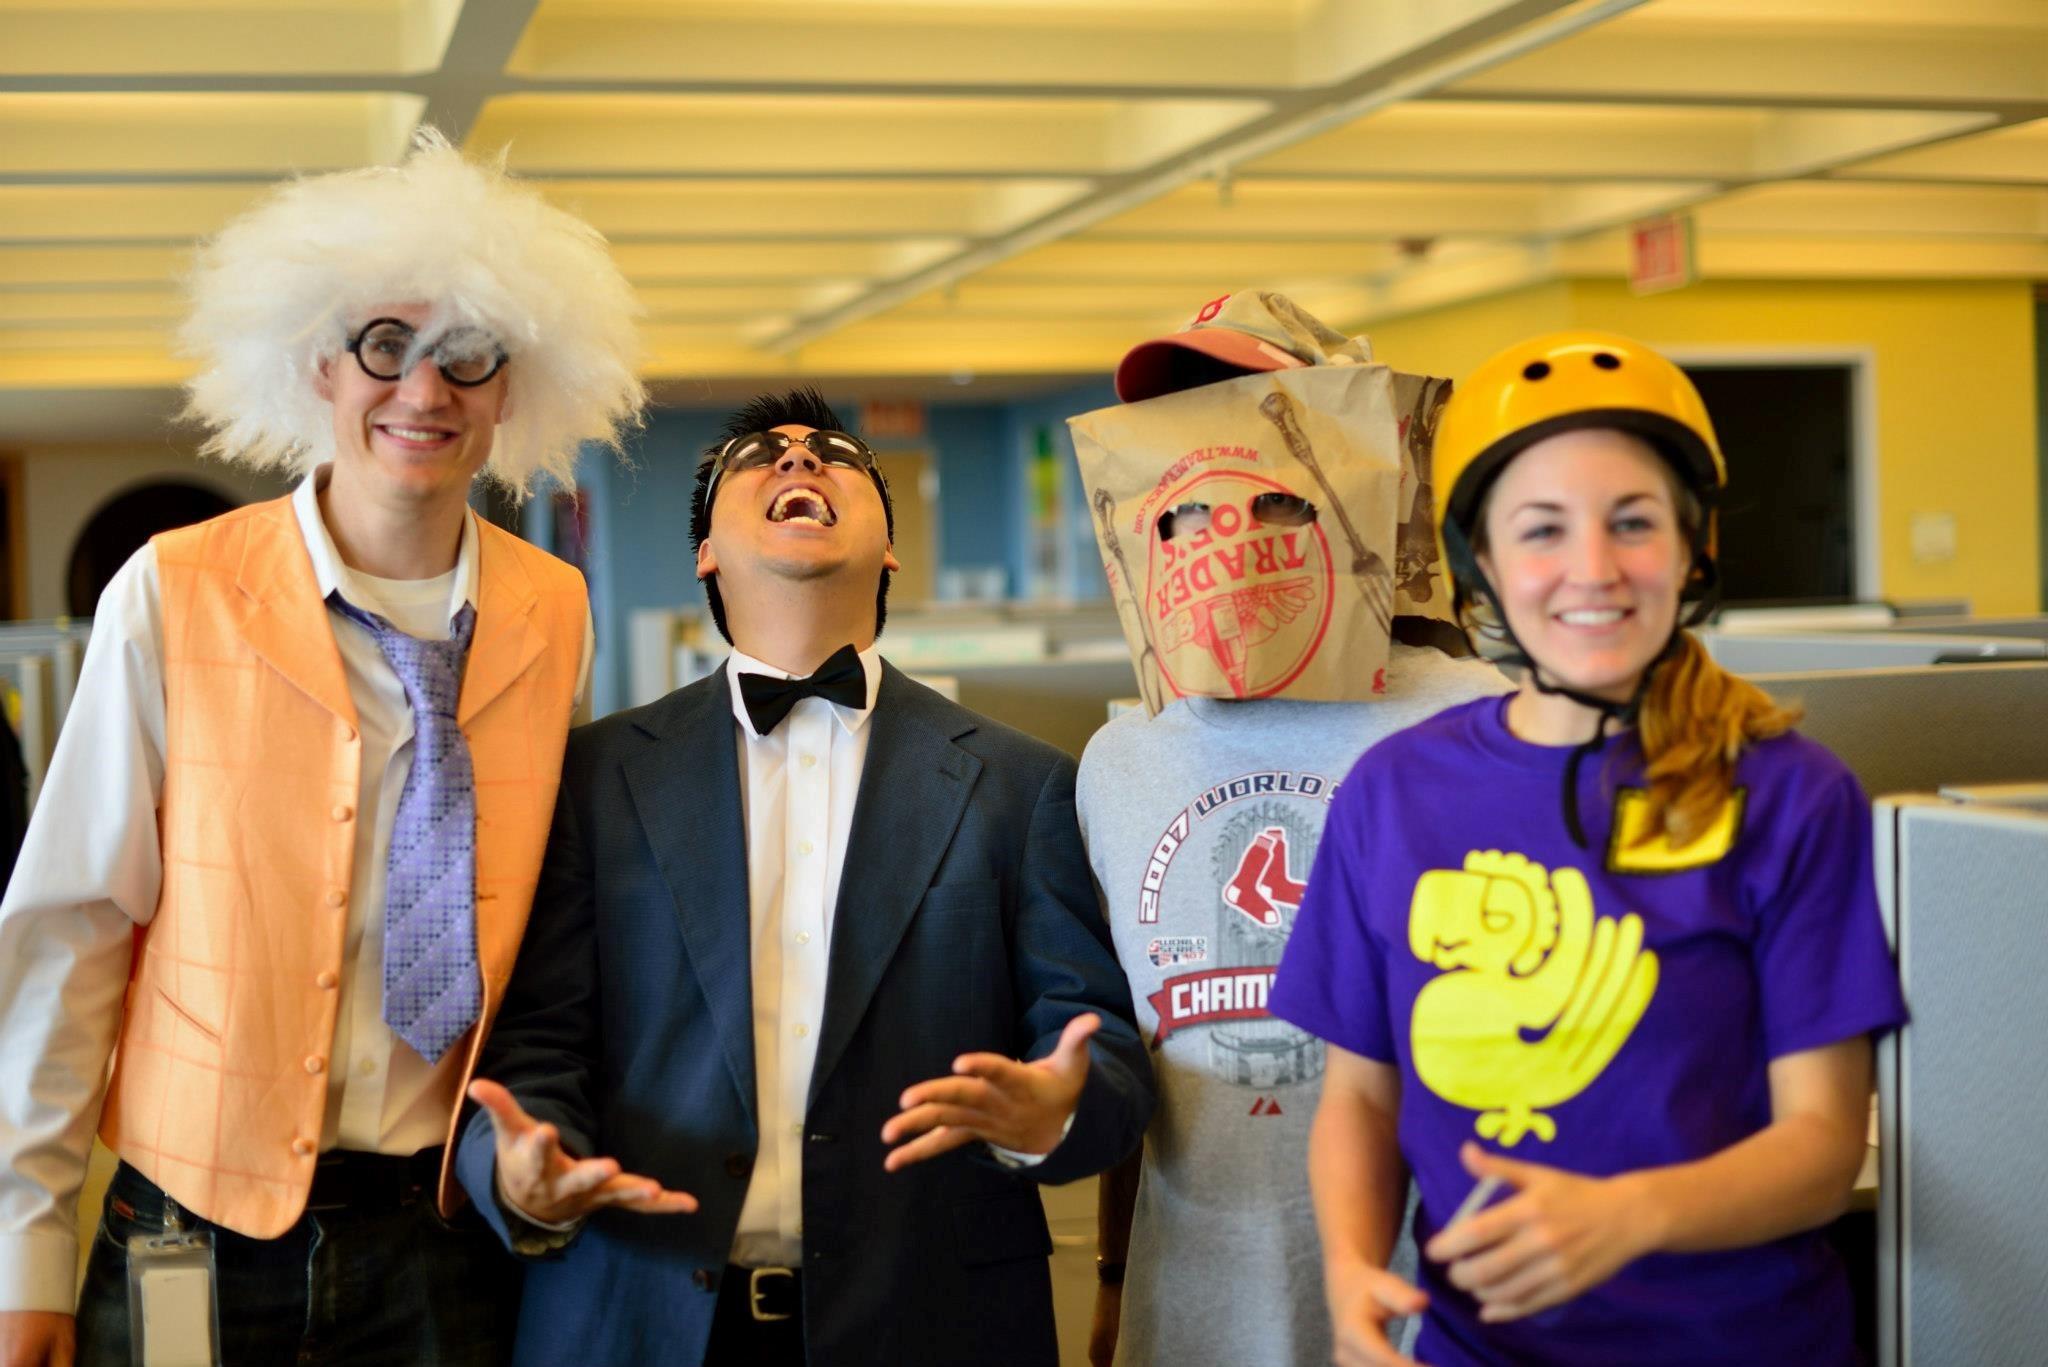 content strategy for the web picture of wordstream employees on halloween